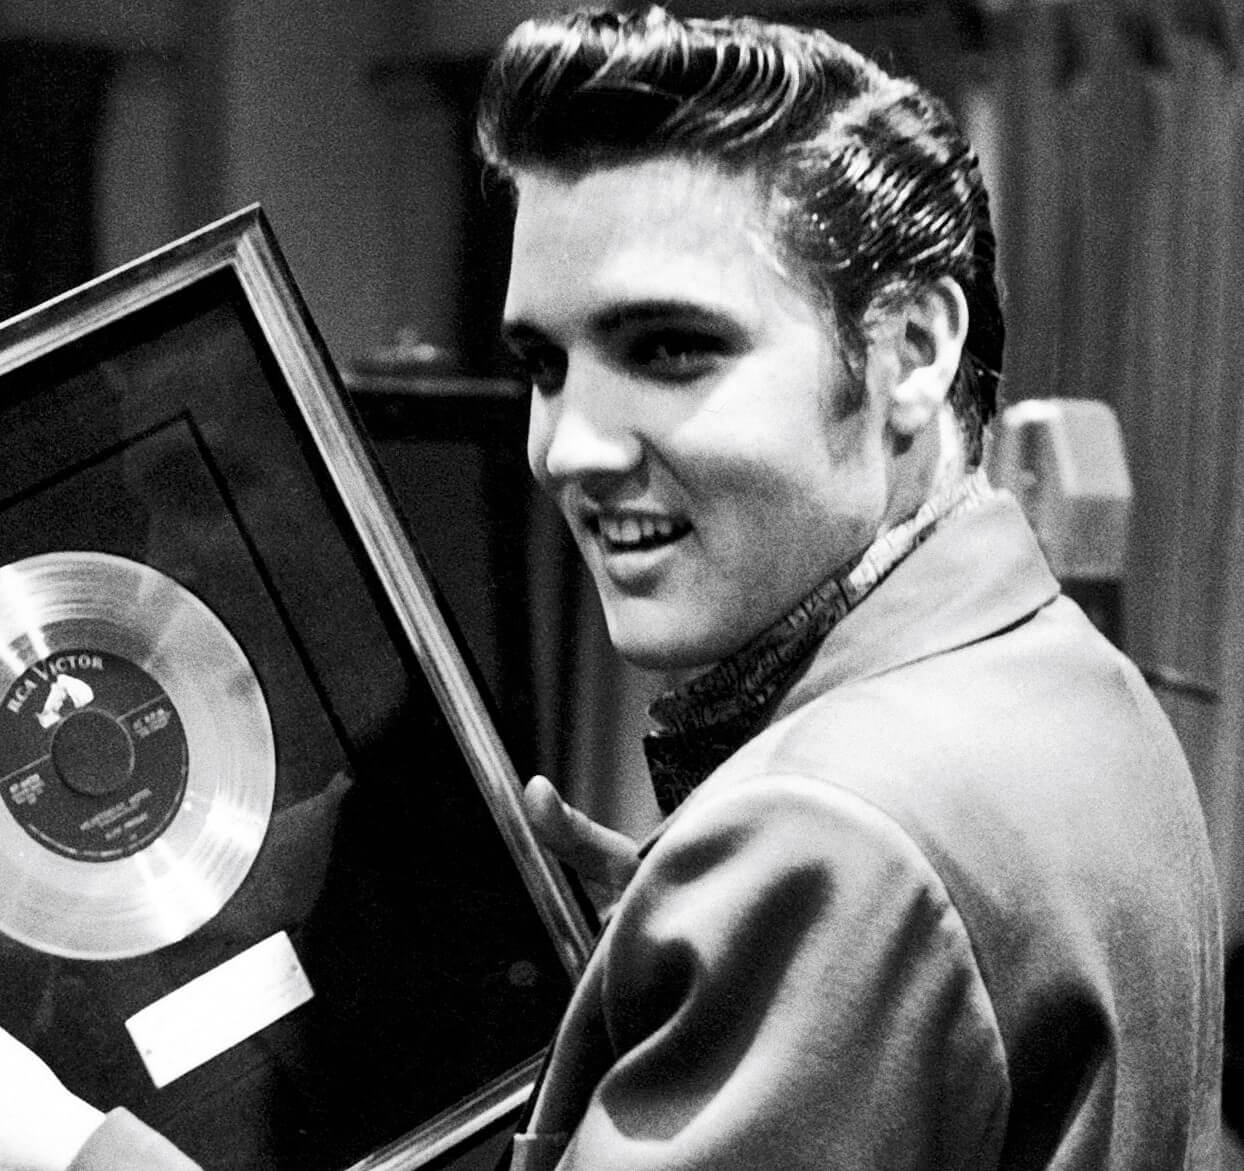 "Such a Night" singer Elvis Presley holding a record